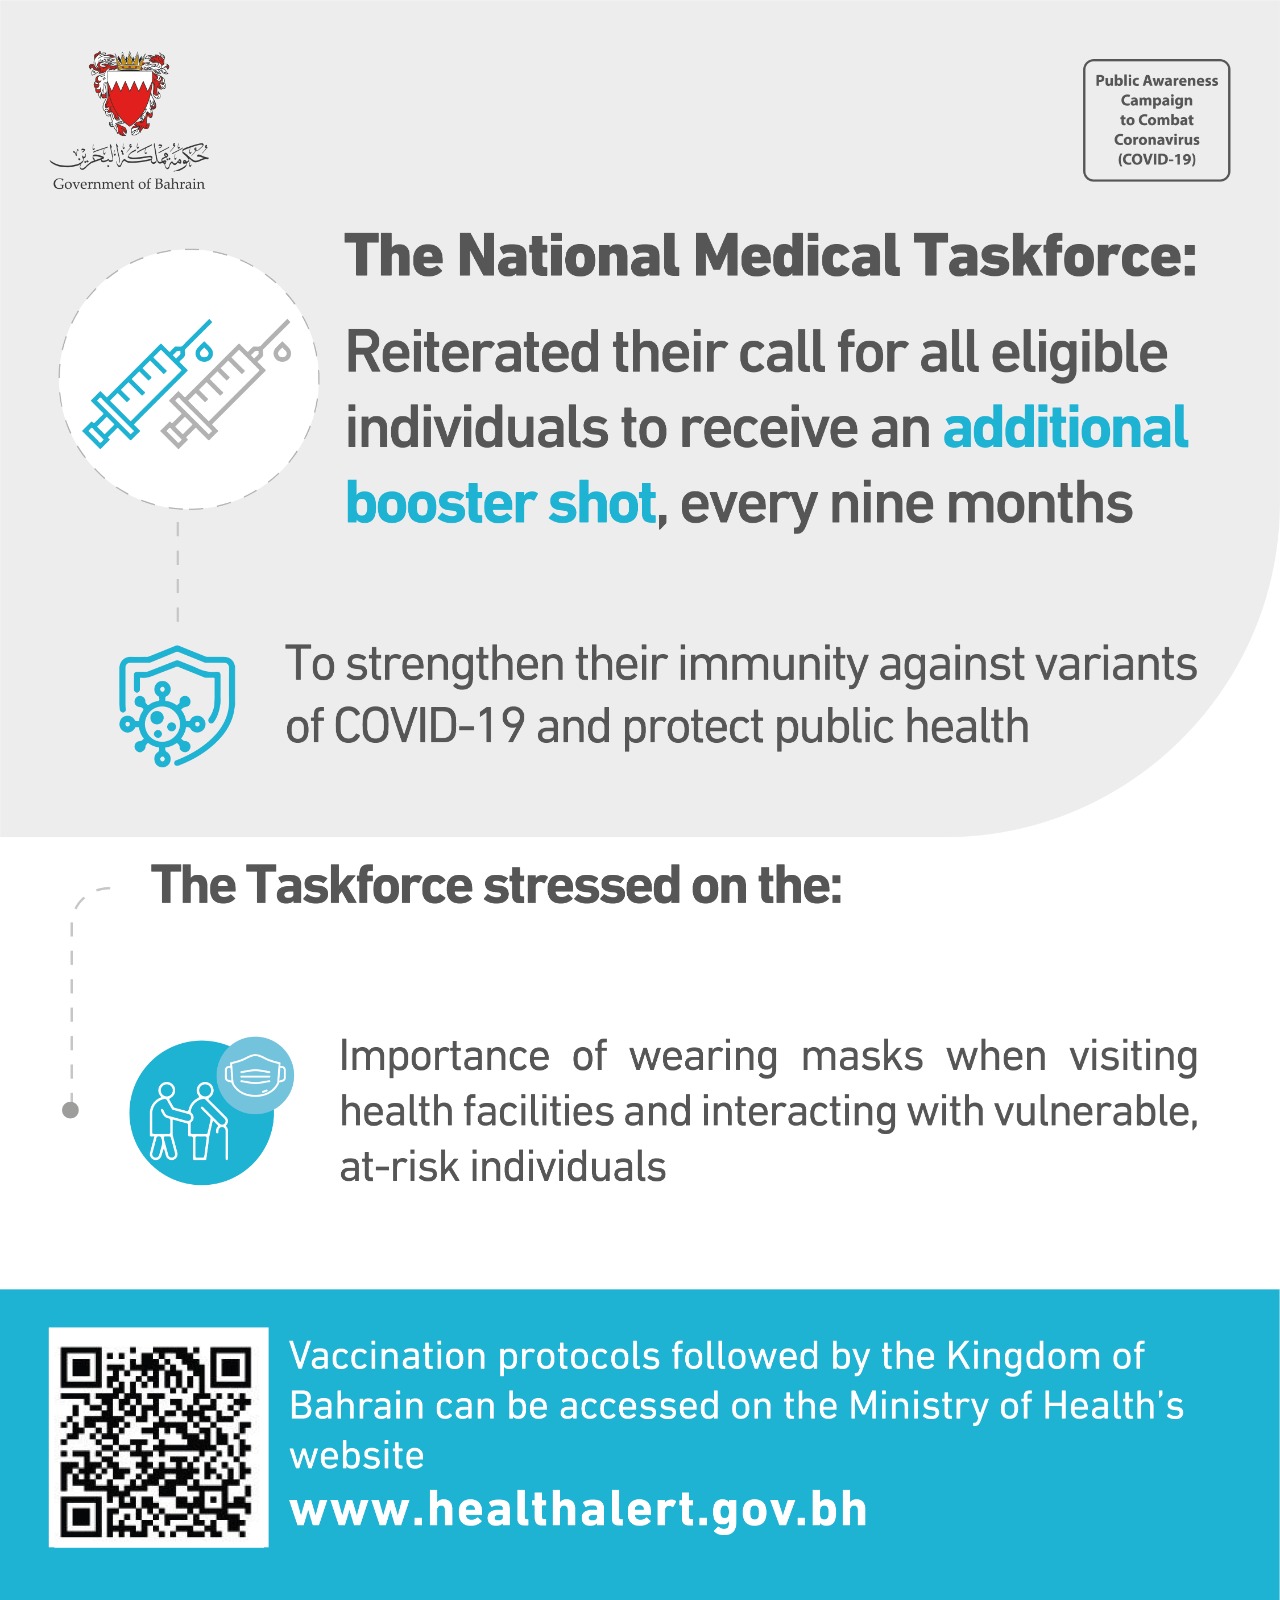 The National Medical Taskforce calls on eligible individuals to receive a COVID-19 booster shot